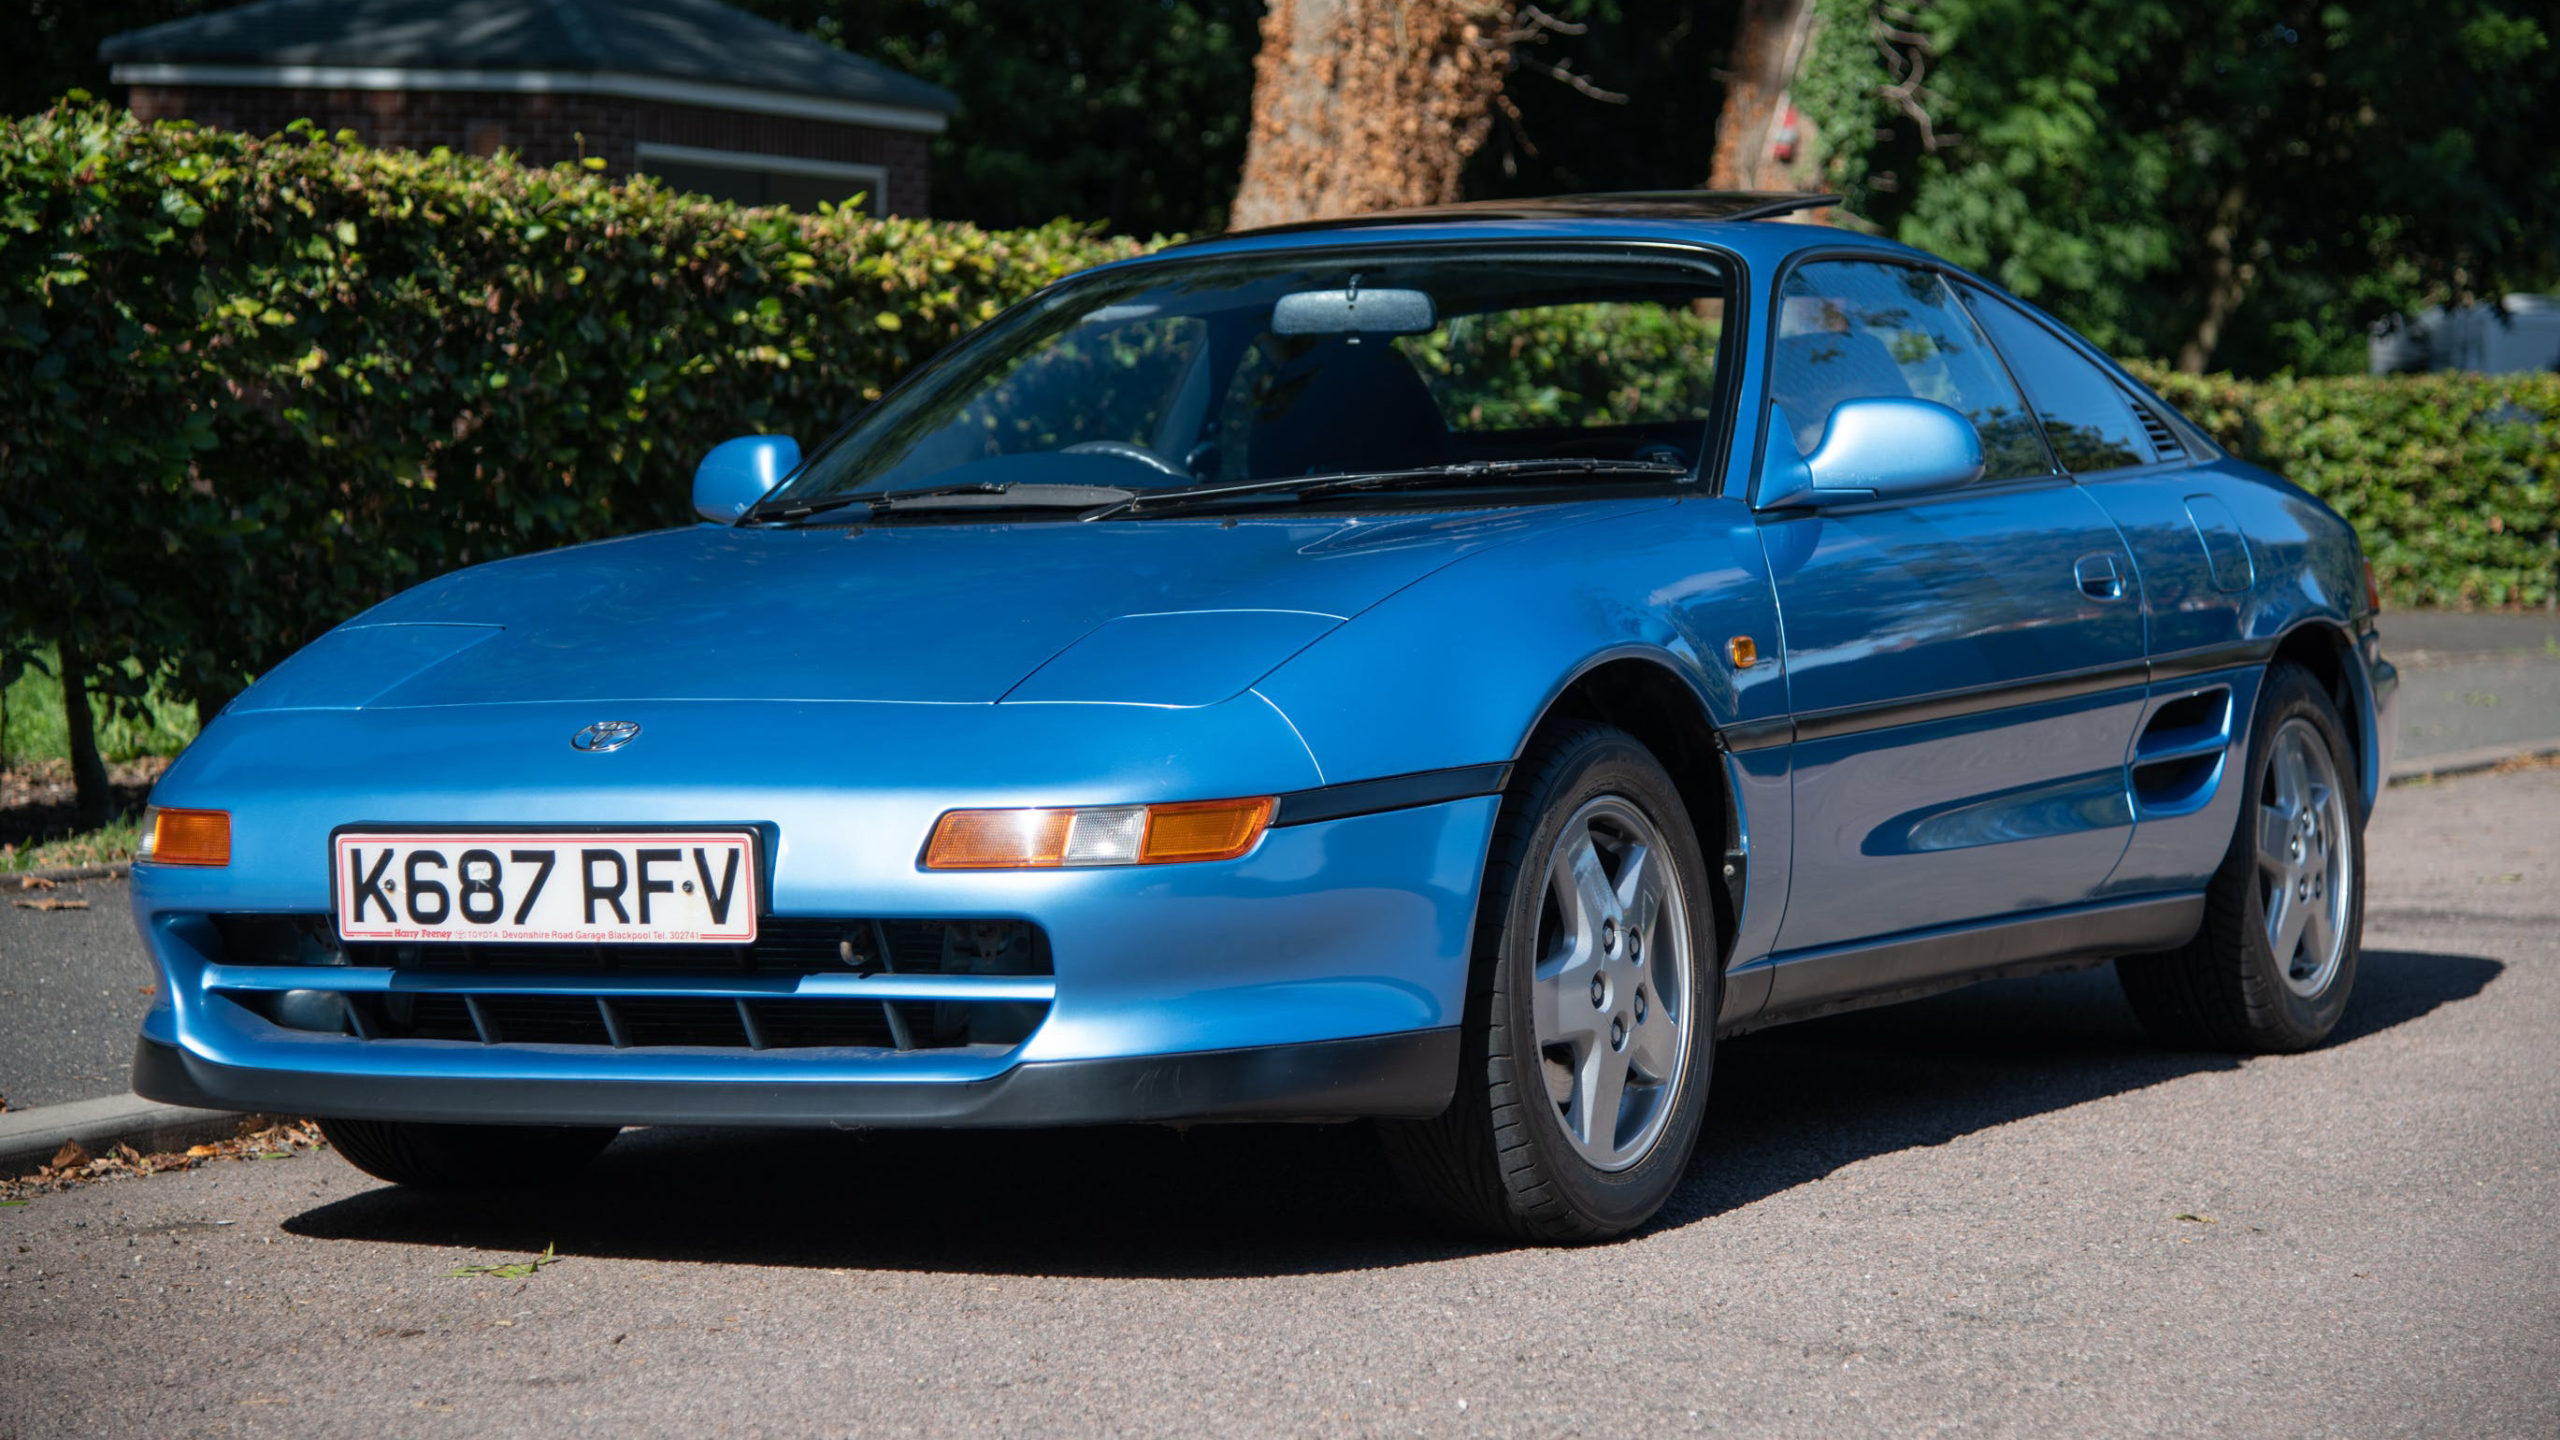 10 of the best used japanese sports cars we found this week for under £10,000